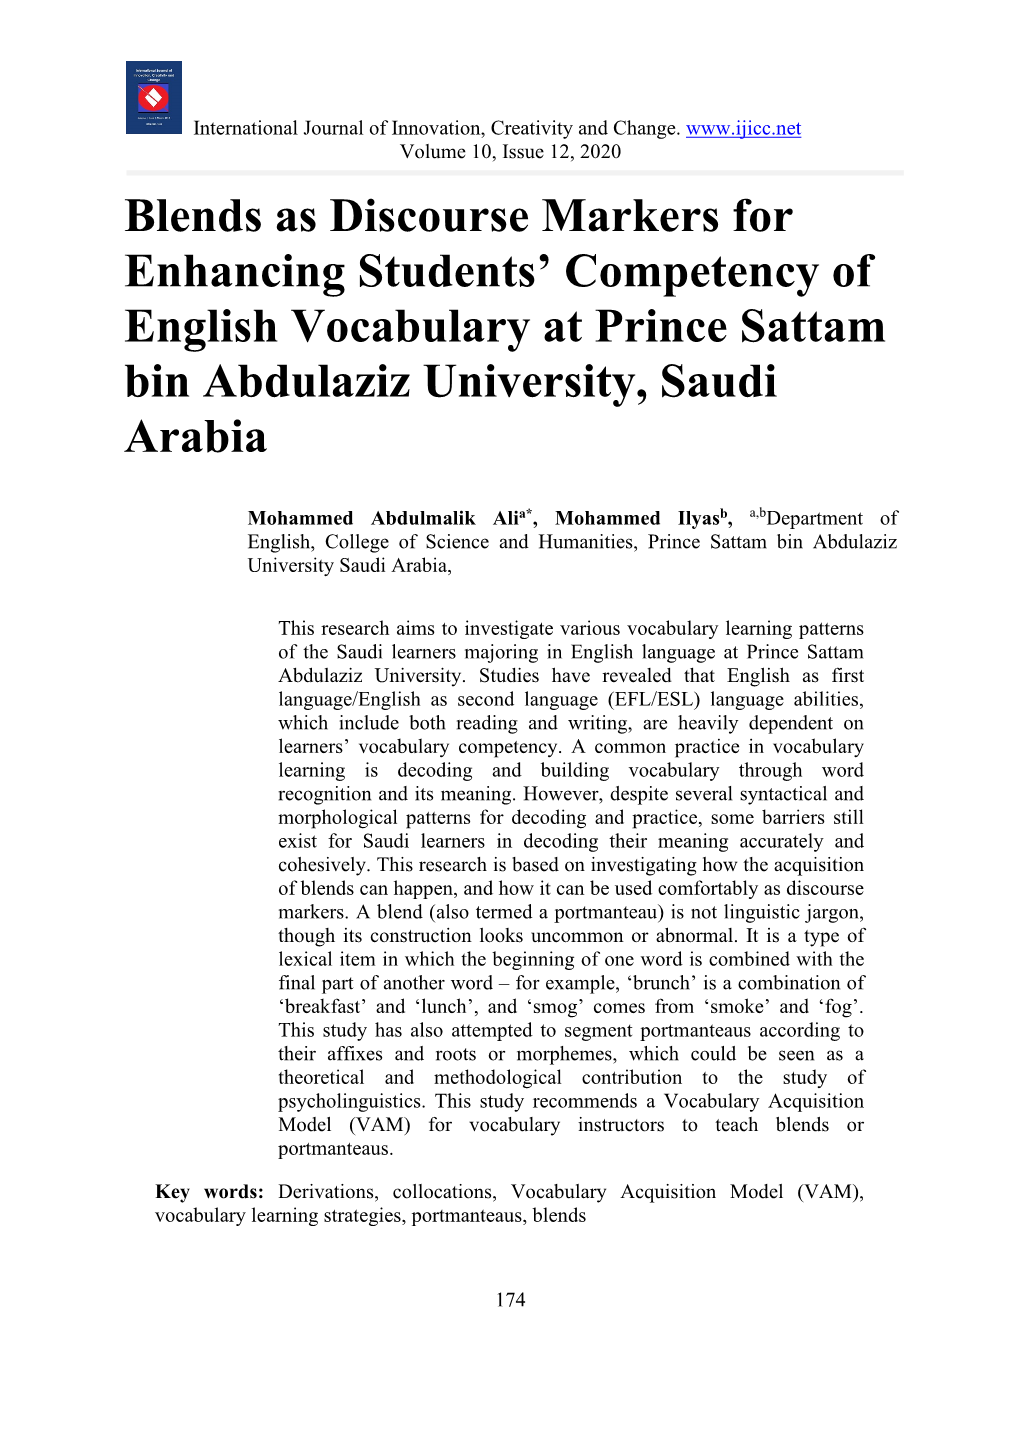 Blends As Discourse Markers for Enhancing Students' Competency